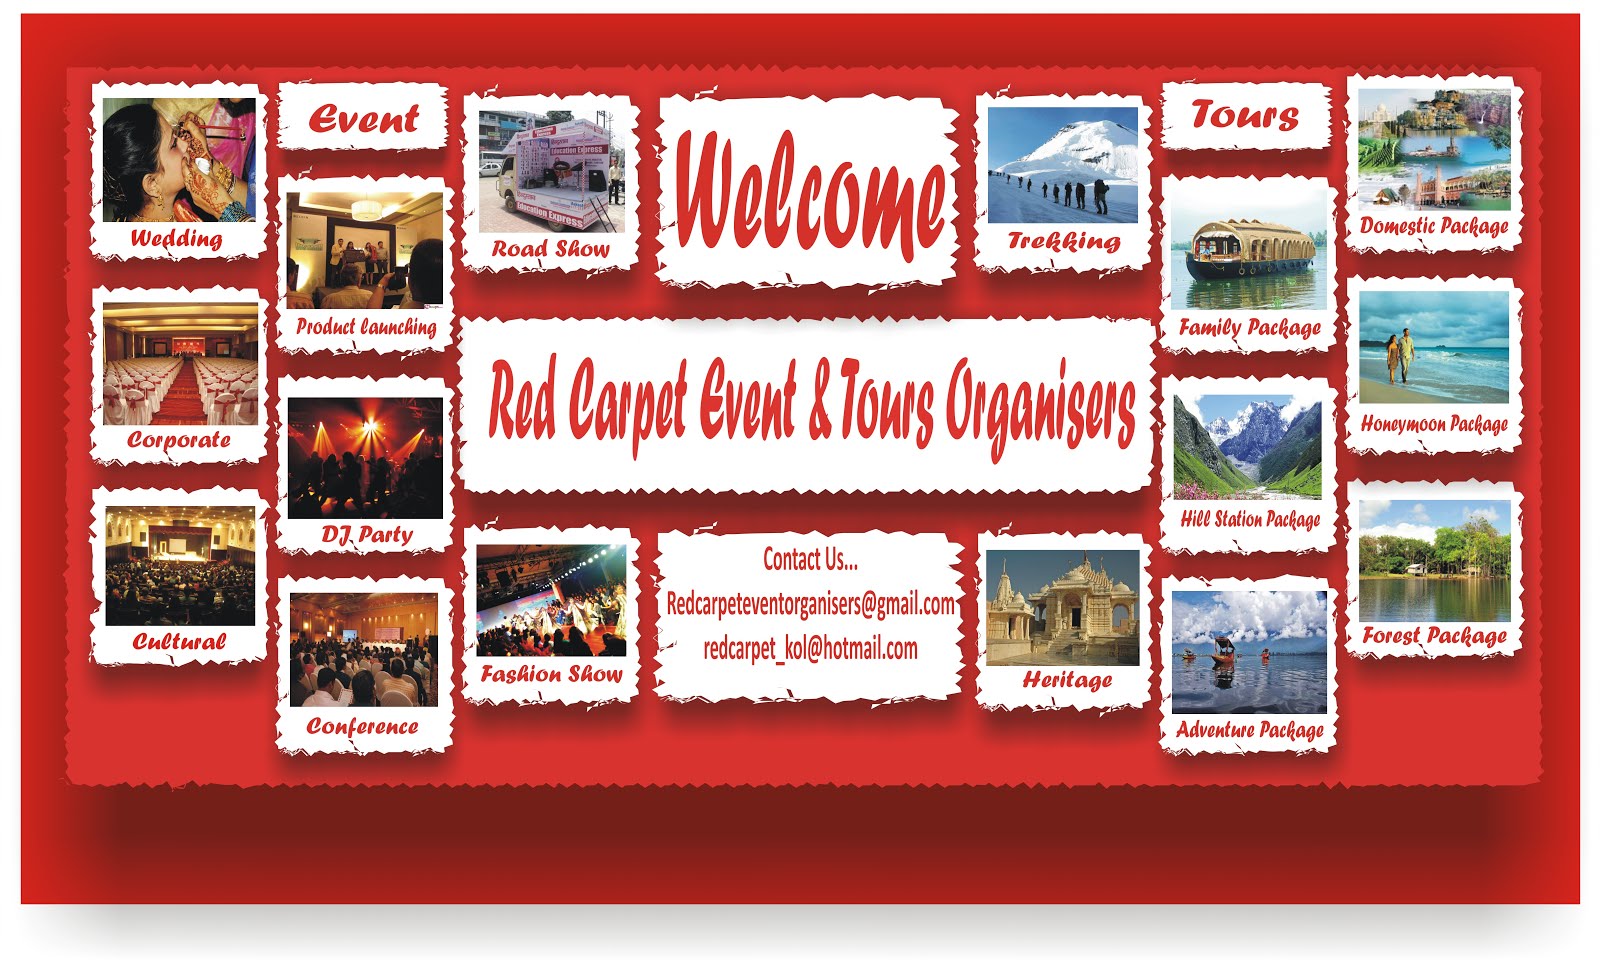 Red Carpet Event &Tours Organisers